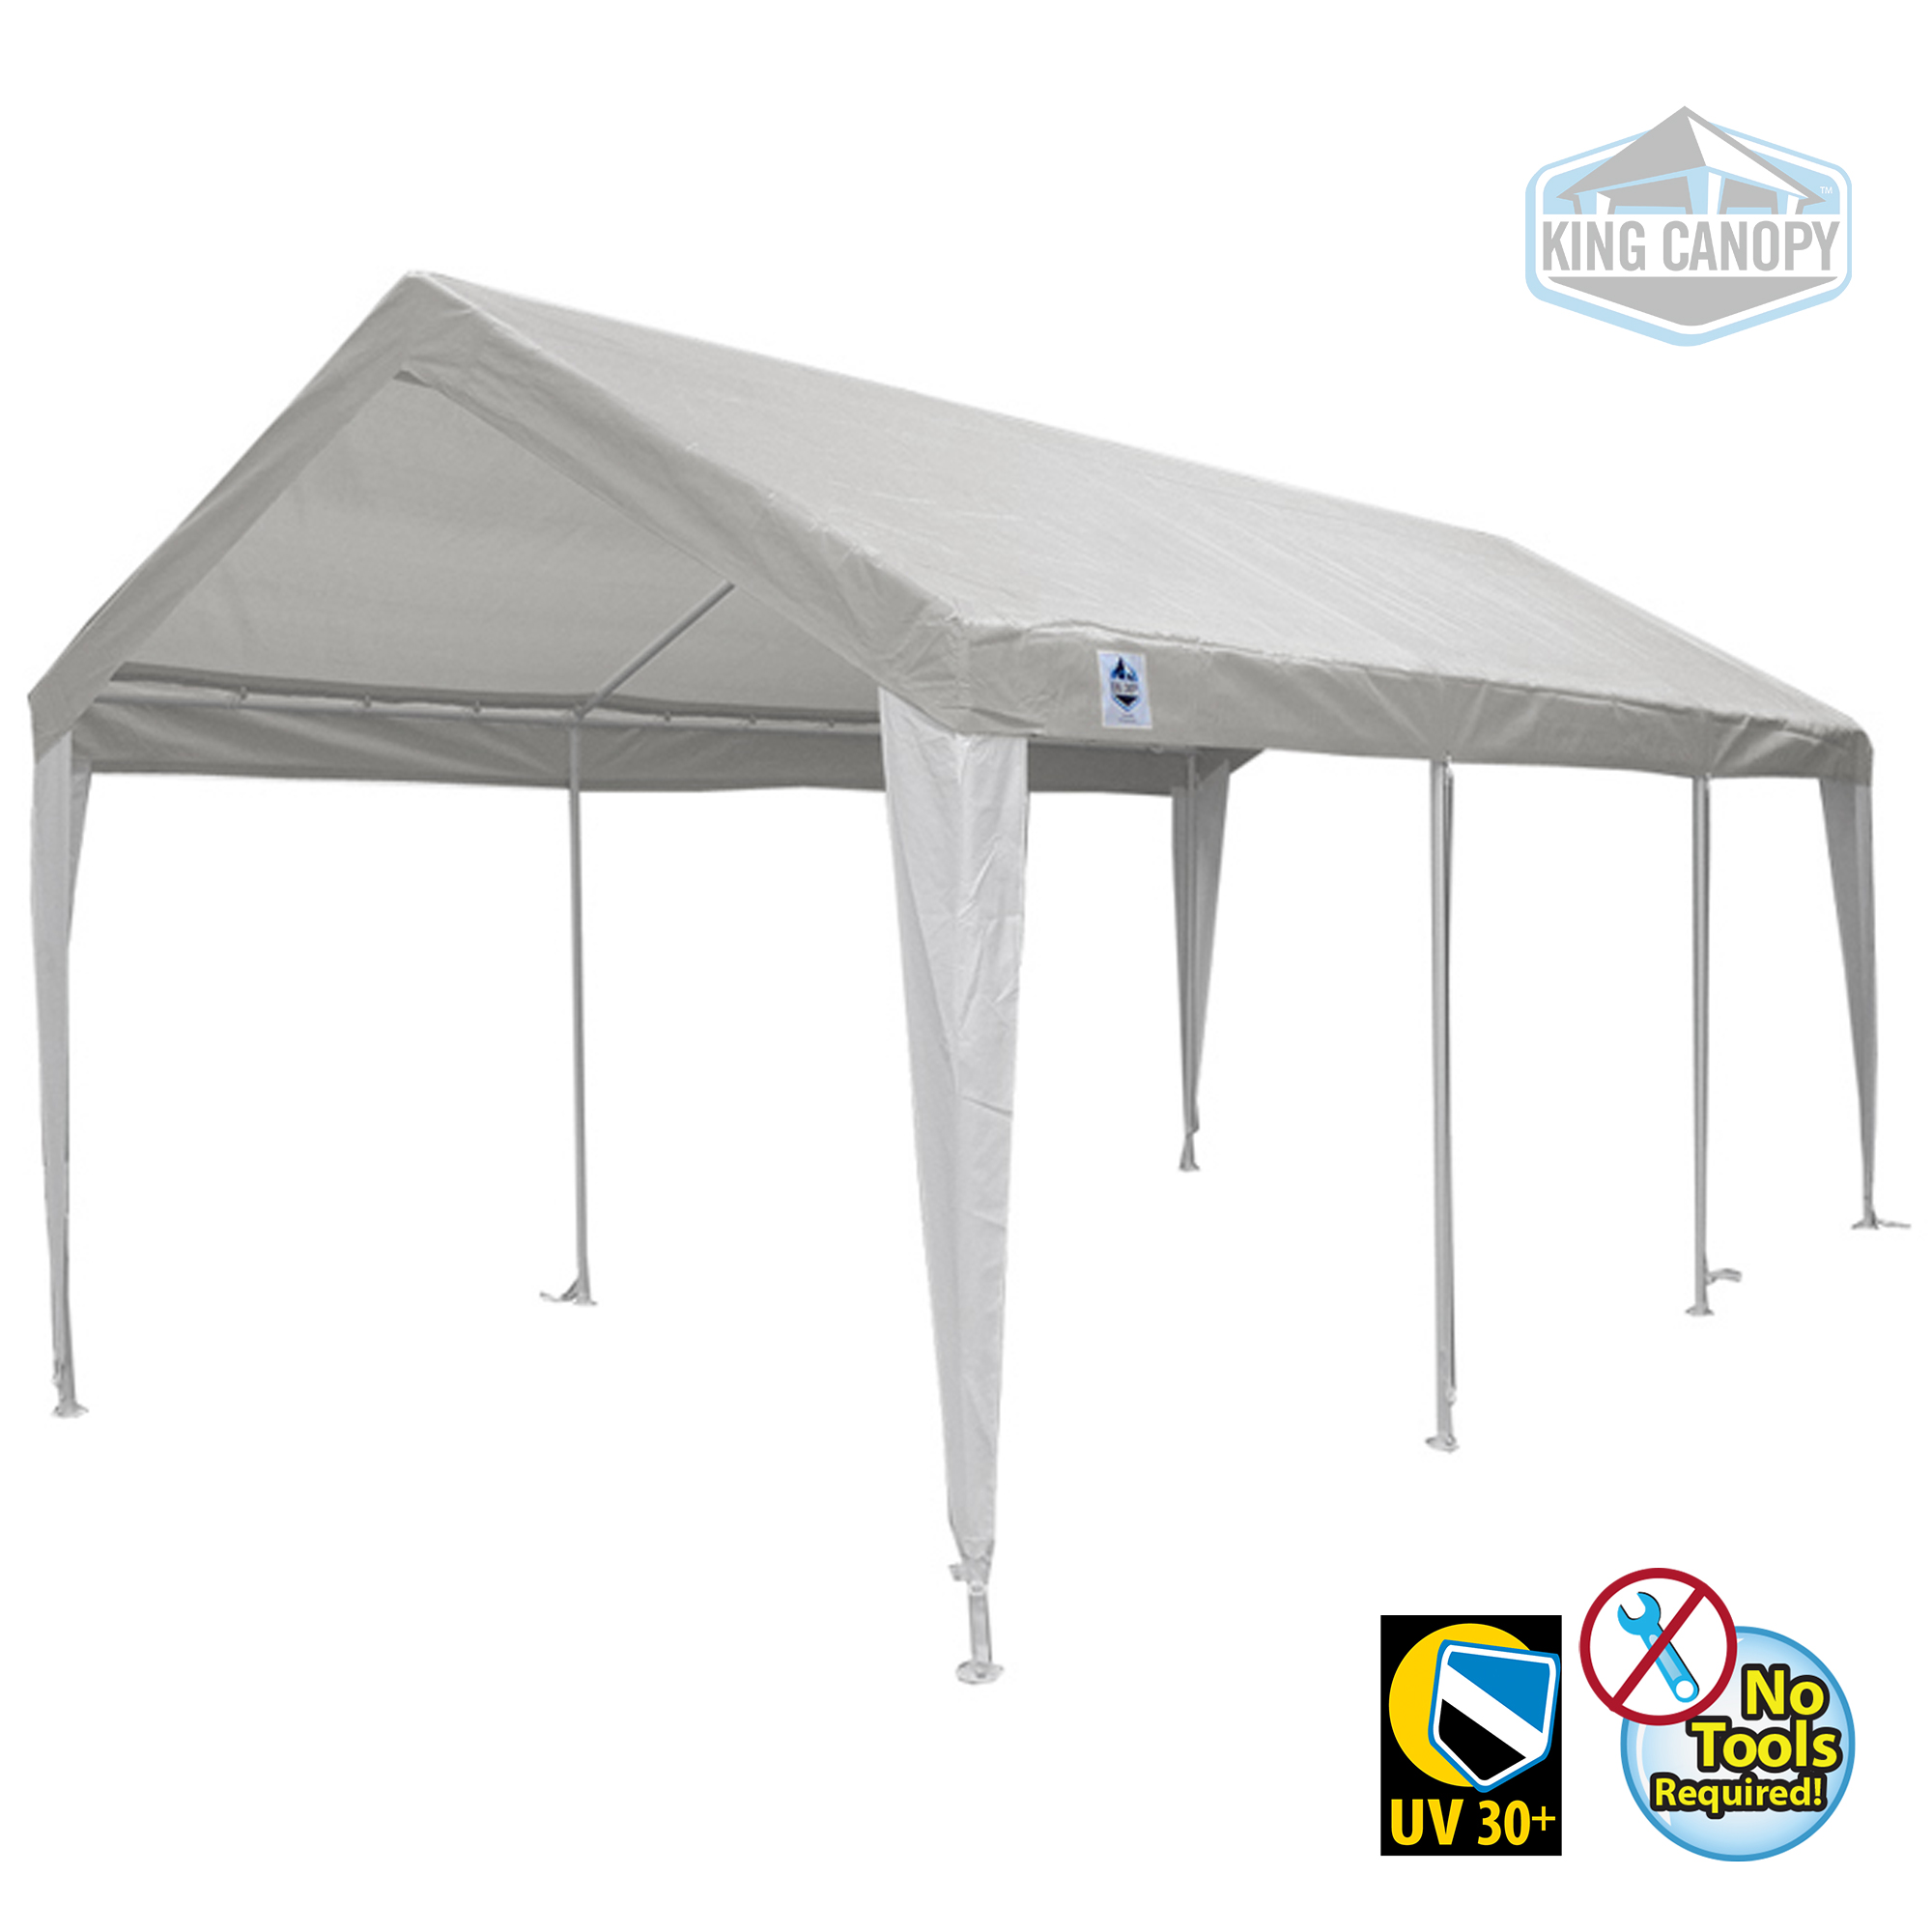 King Canopy Hercules 10x20 Canopy W Whitewhite Cover